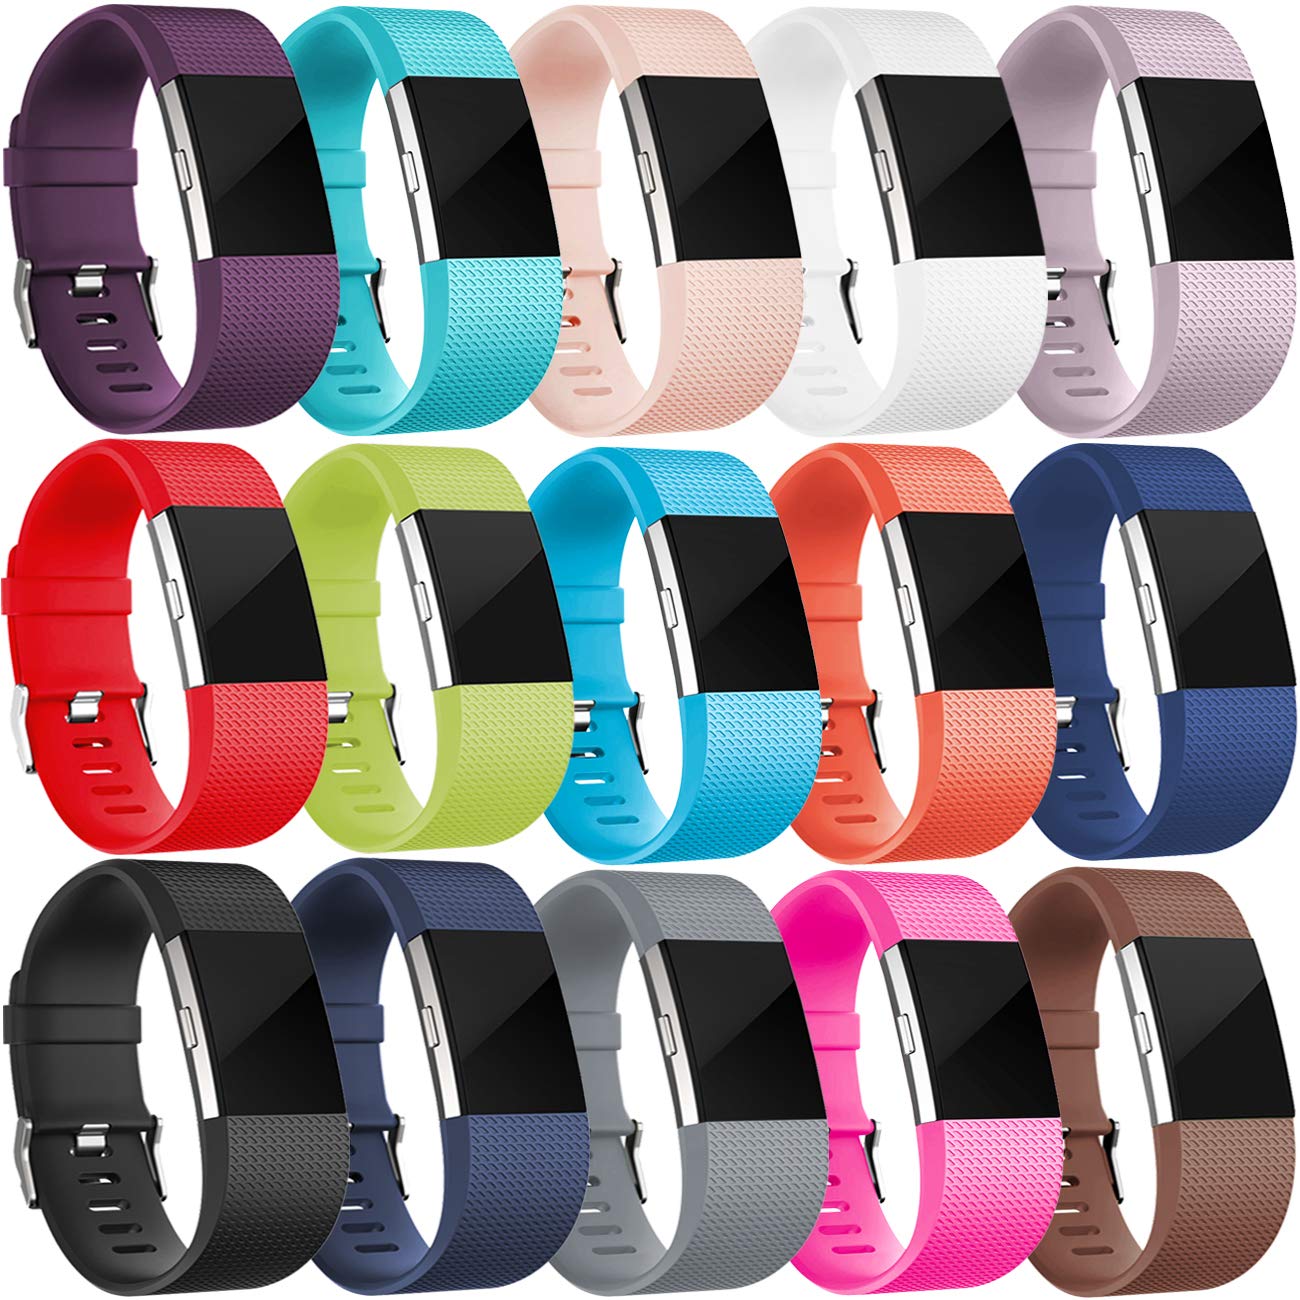 Wepro Bands Compatible with Fitbit Charge 2, 15 Pack